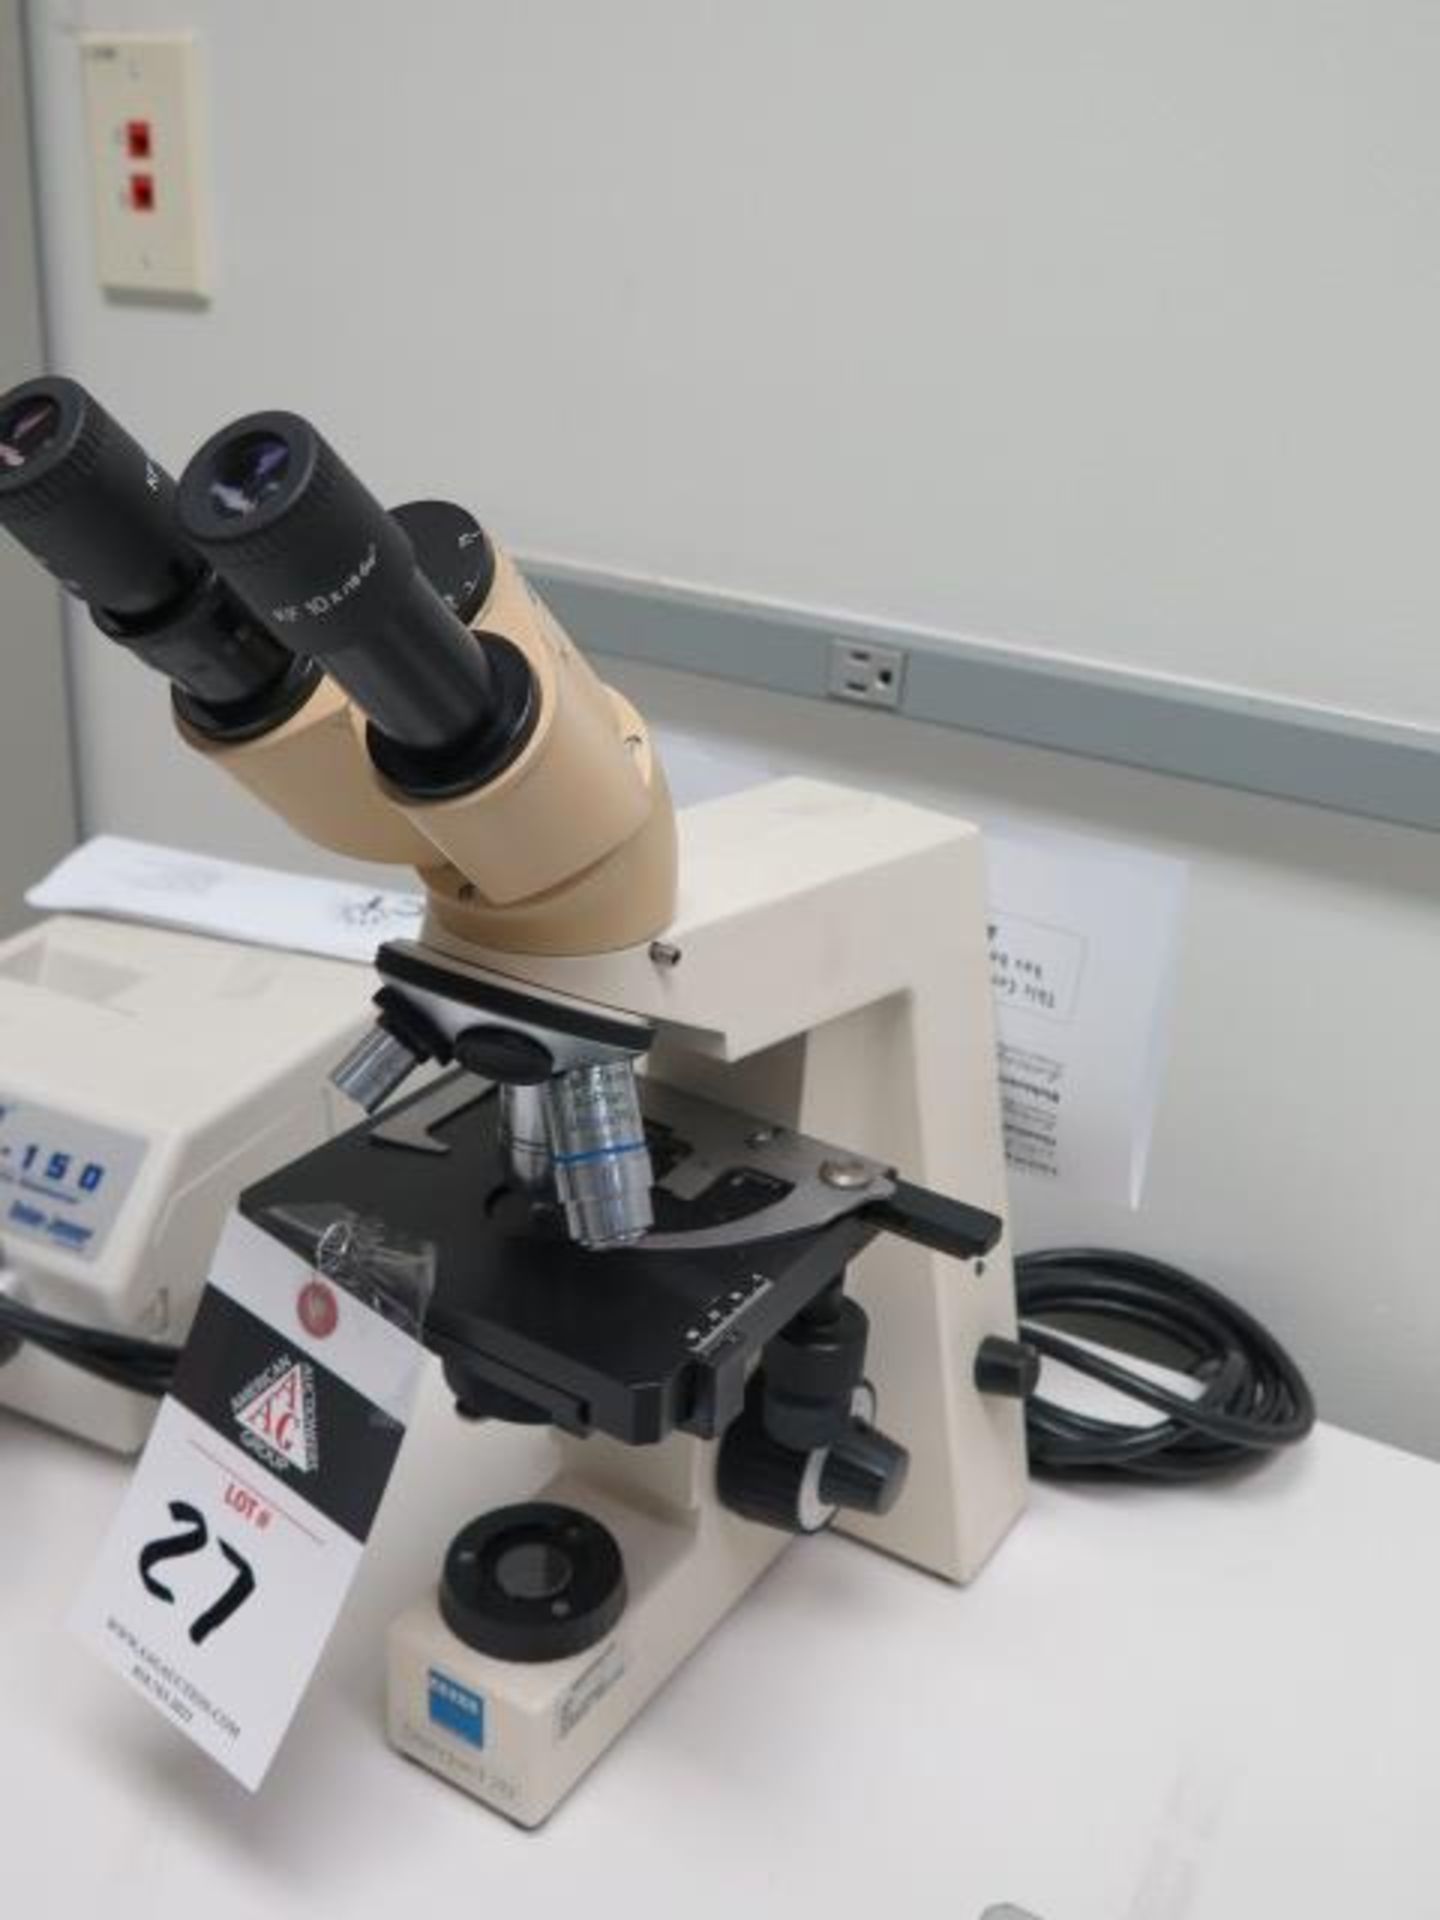 Zeiss “Standard 20” Stereo Microscope w/ 3-Objectives and Light Source (SOLD AS-IS - NO WARRANTY) - Image 2 of 9